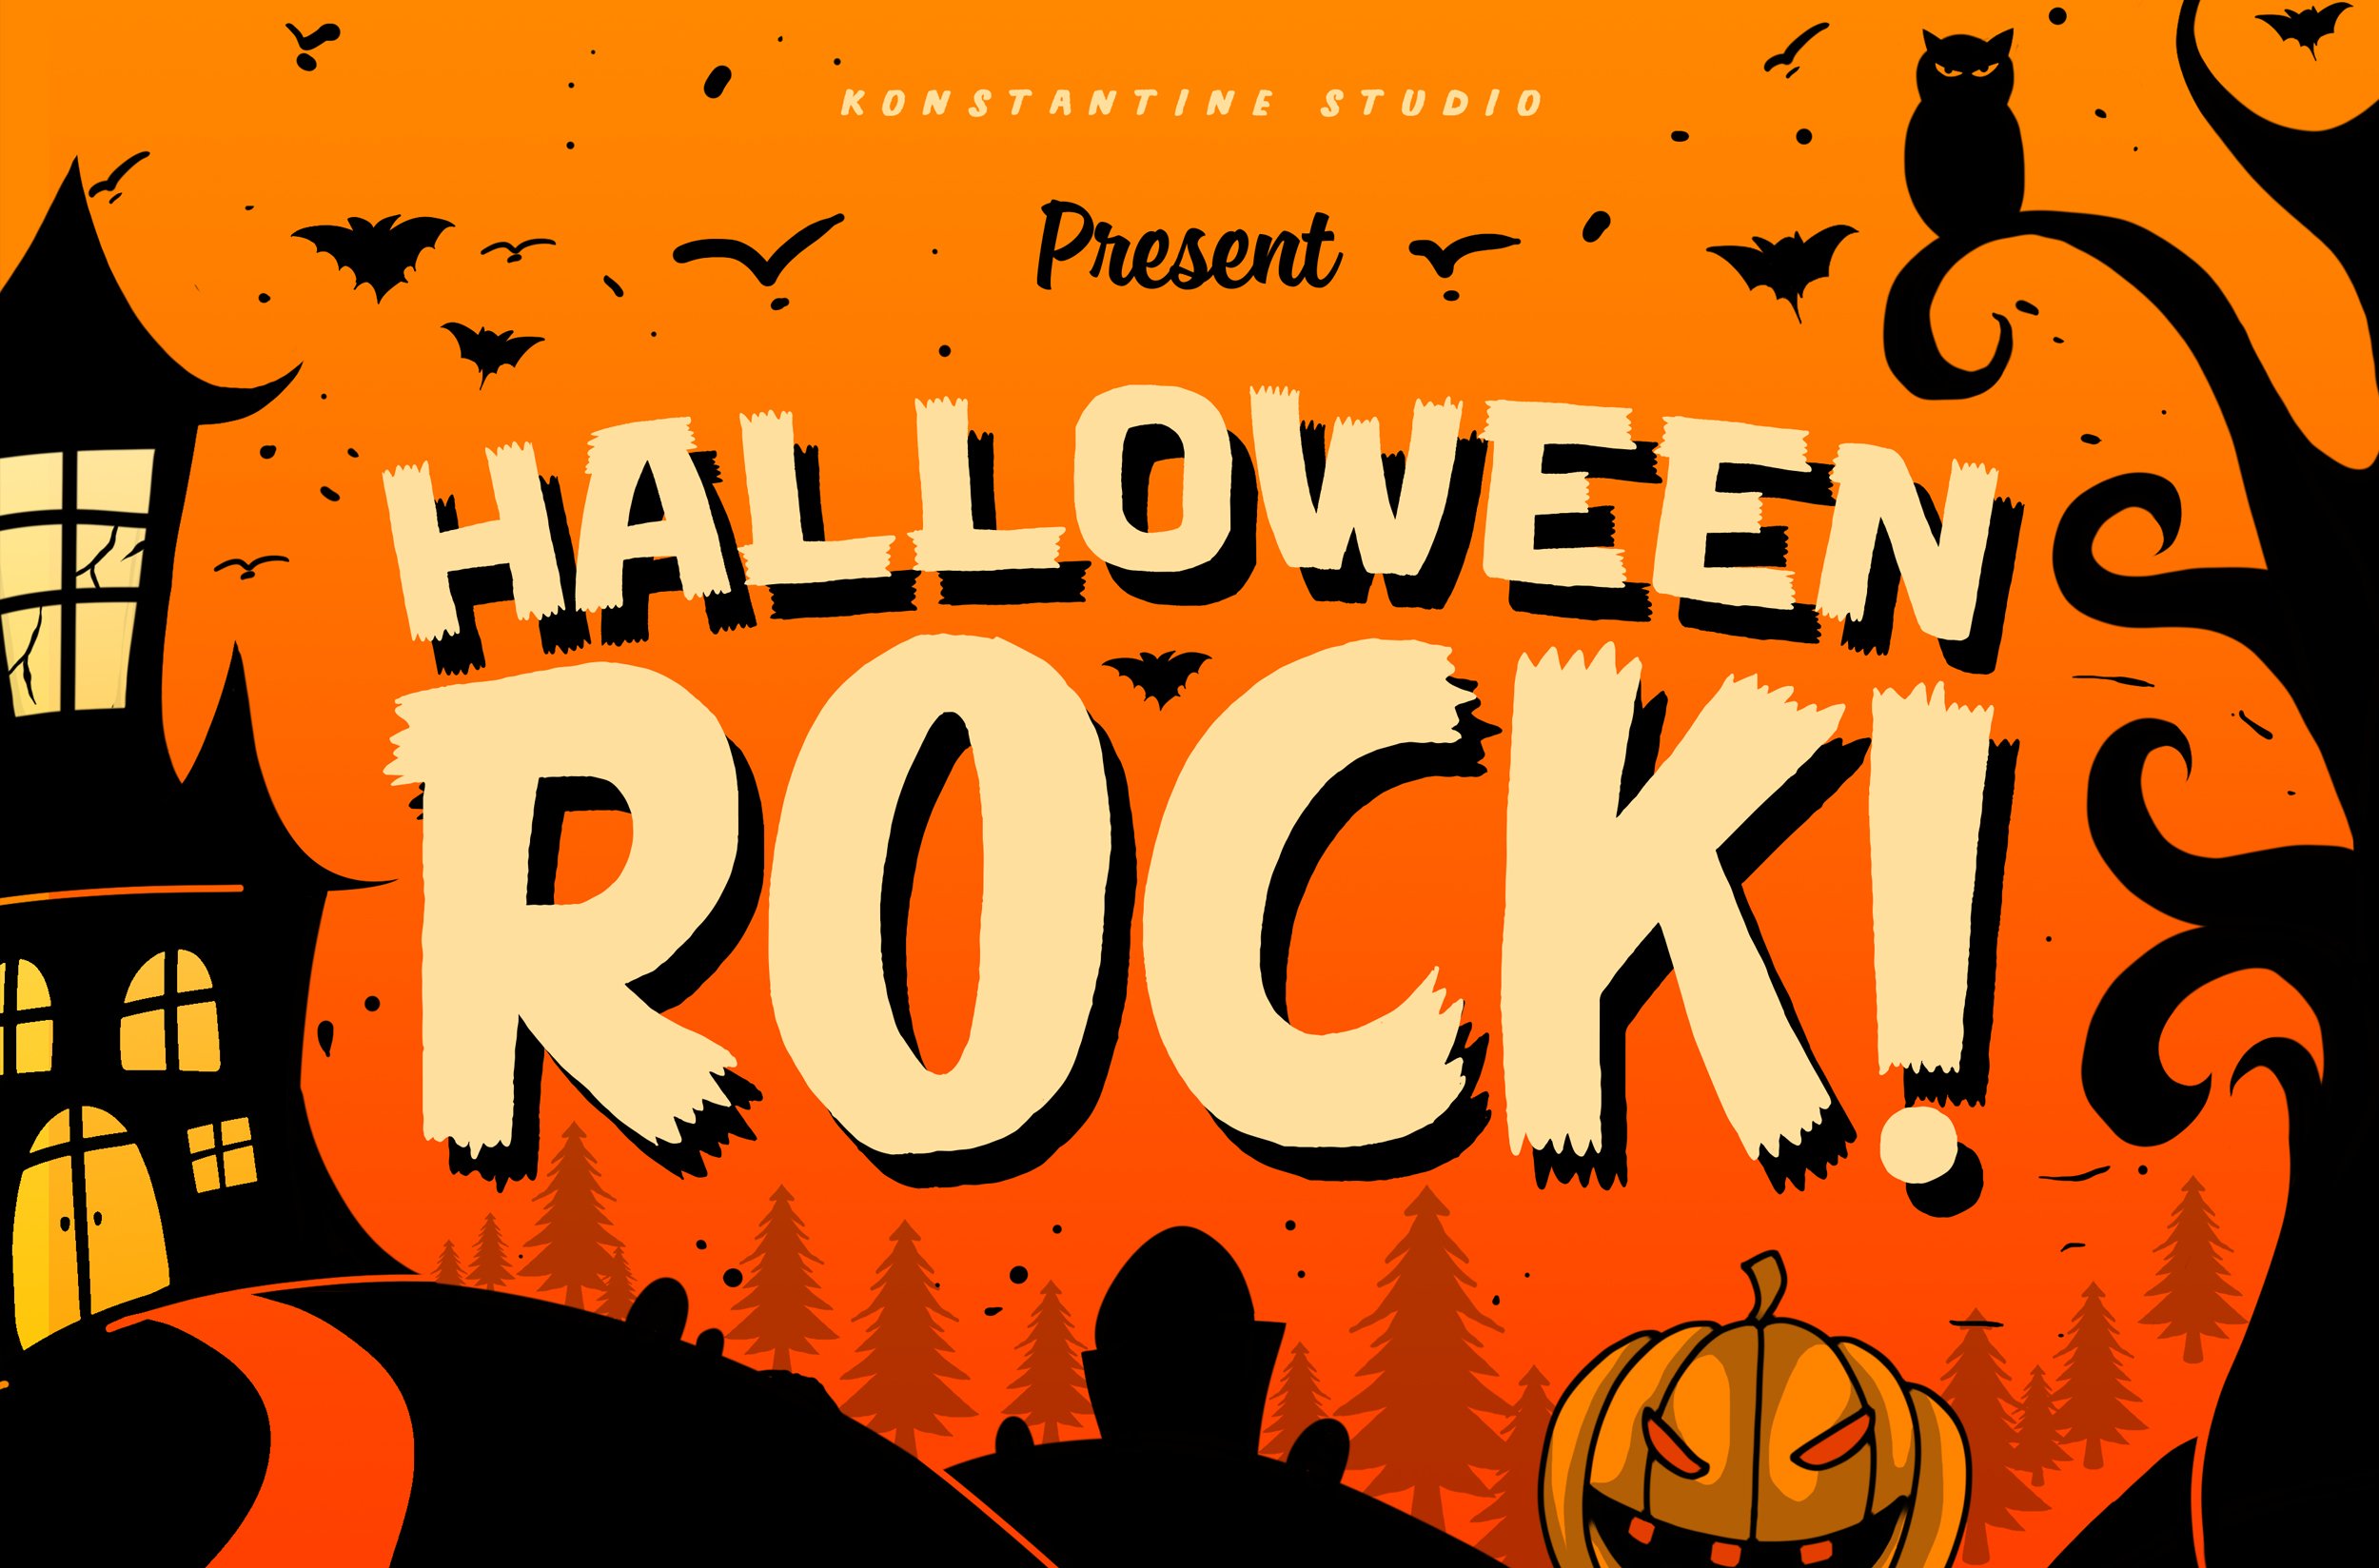 Halloween Rock! | Cute Horror Font cover image.